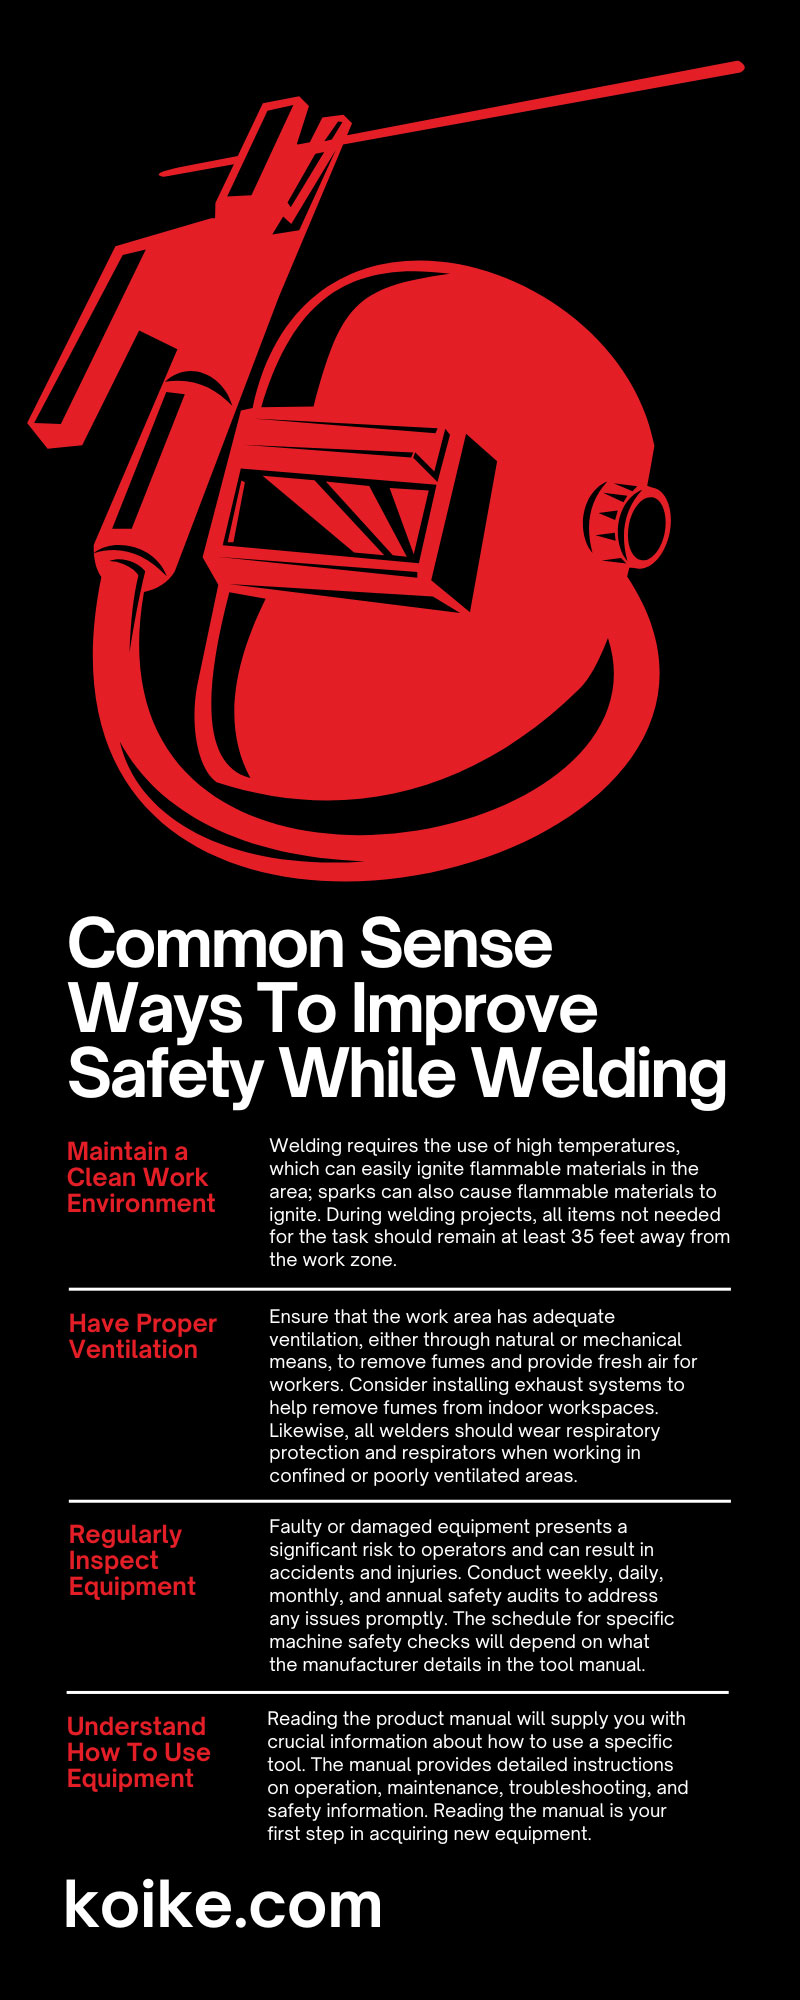 8 Common Sense Ways To Improve Safety While Welding